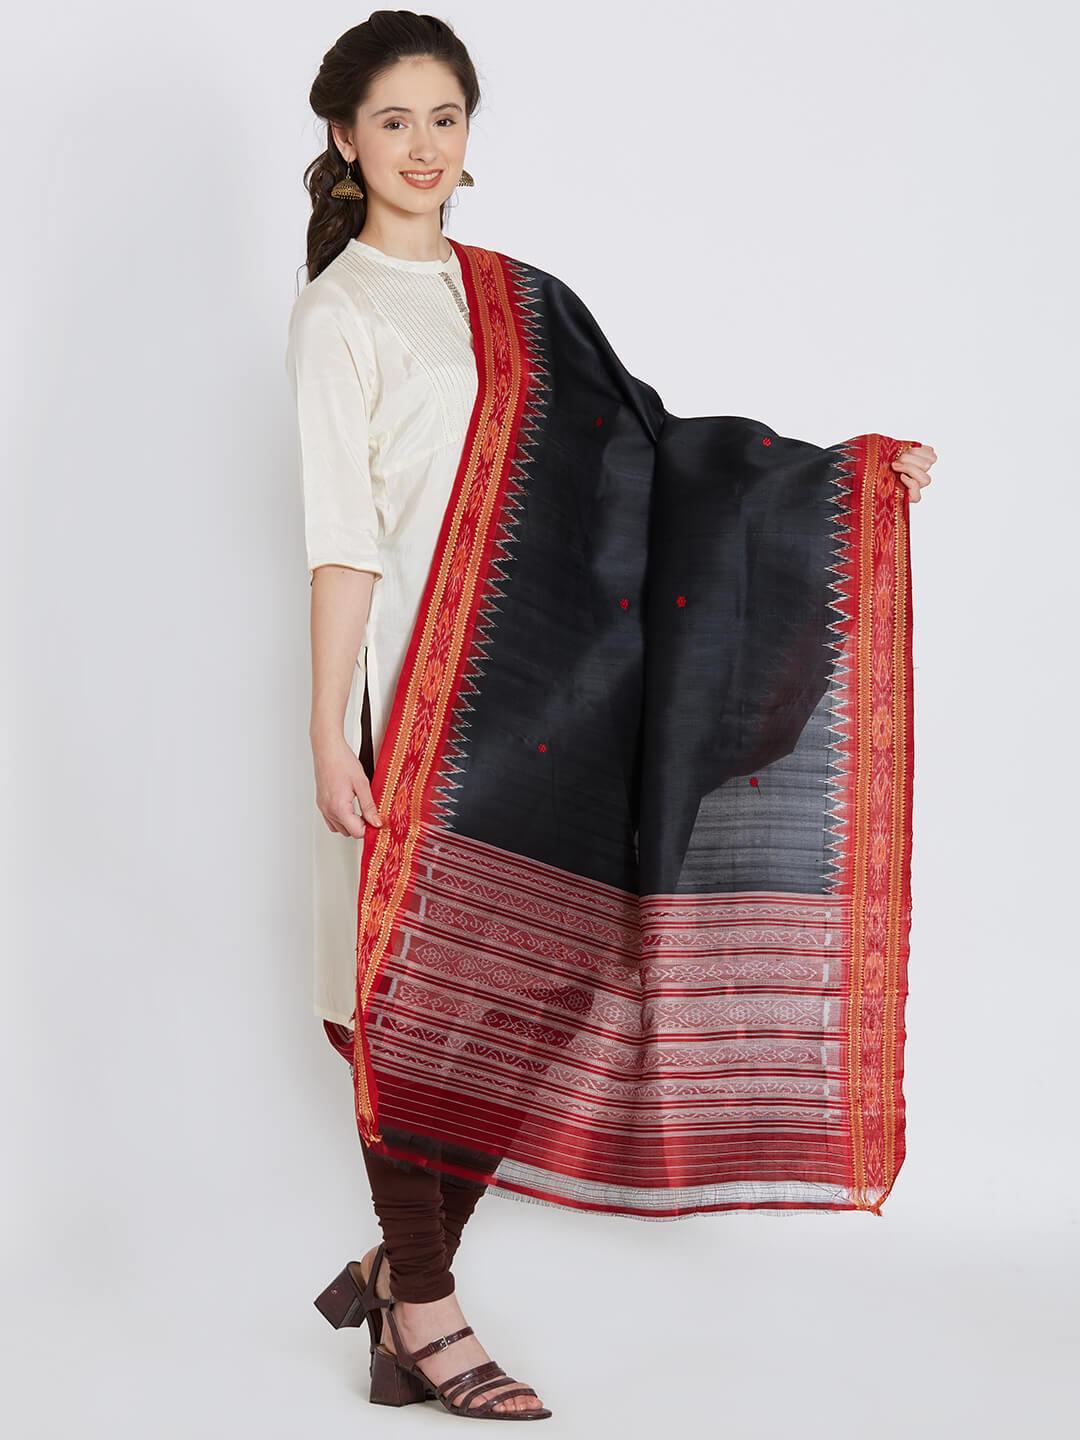 CraftsCollection.in - Black and Red Khandua Silk Dupatta